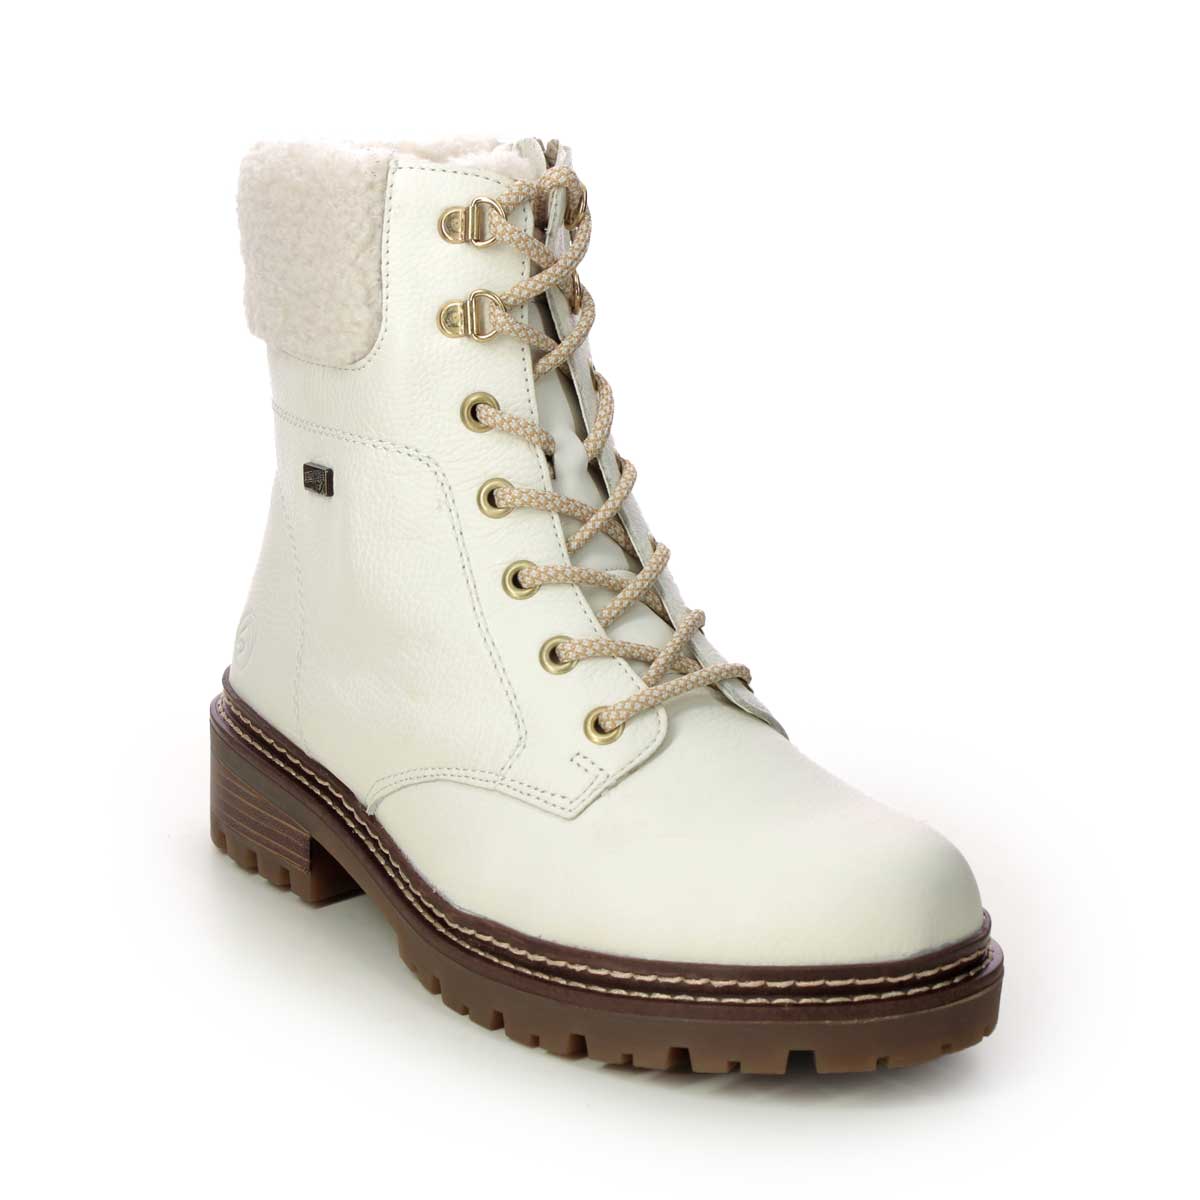 Remonte Astra Teddy Tex White Leather Womens Winter Boots D0B74-81 In Size 36 In Plain White Leather